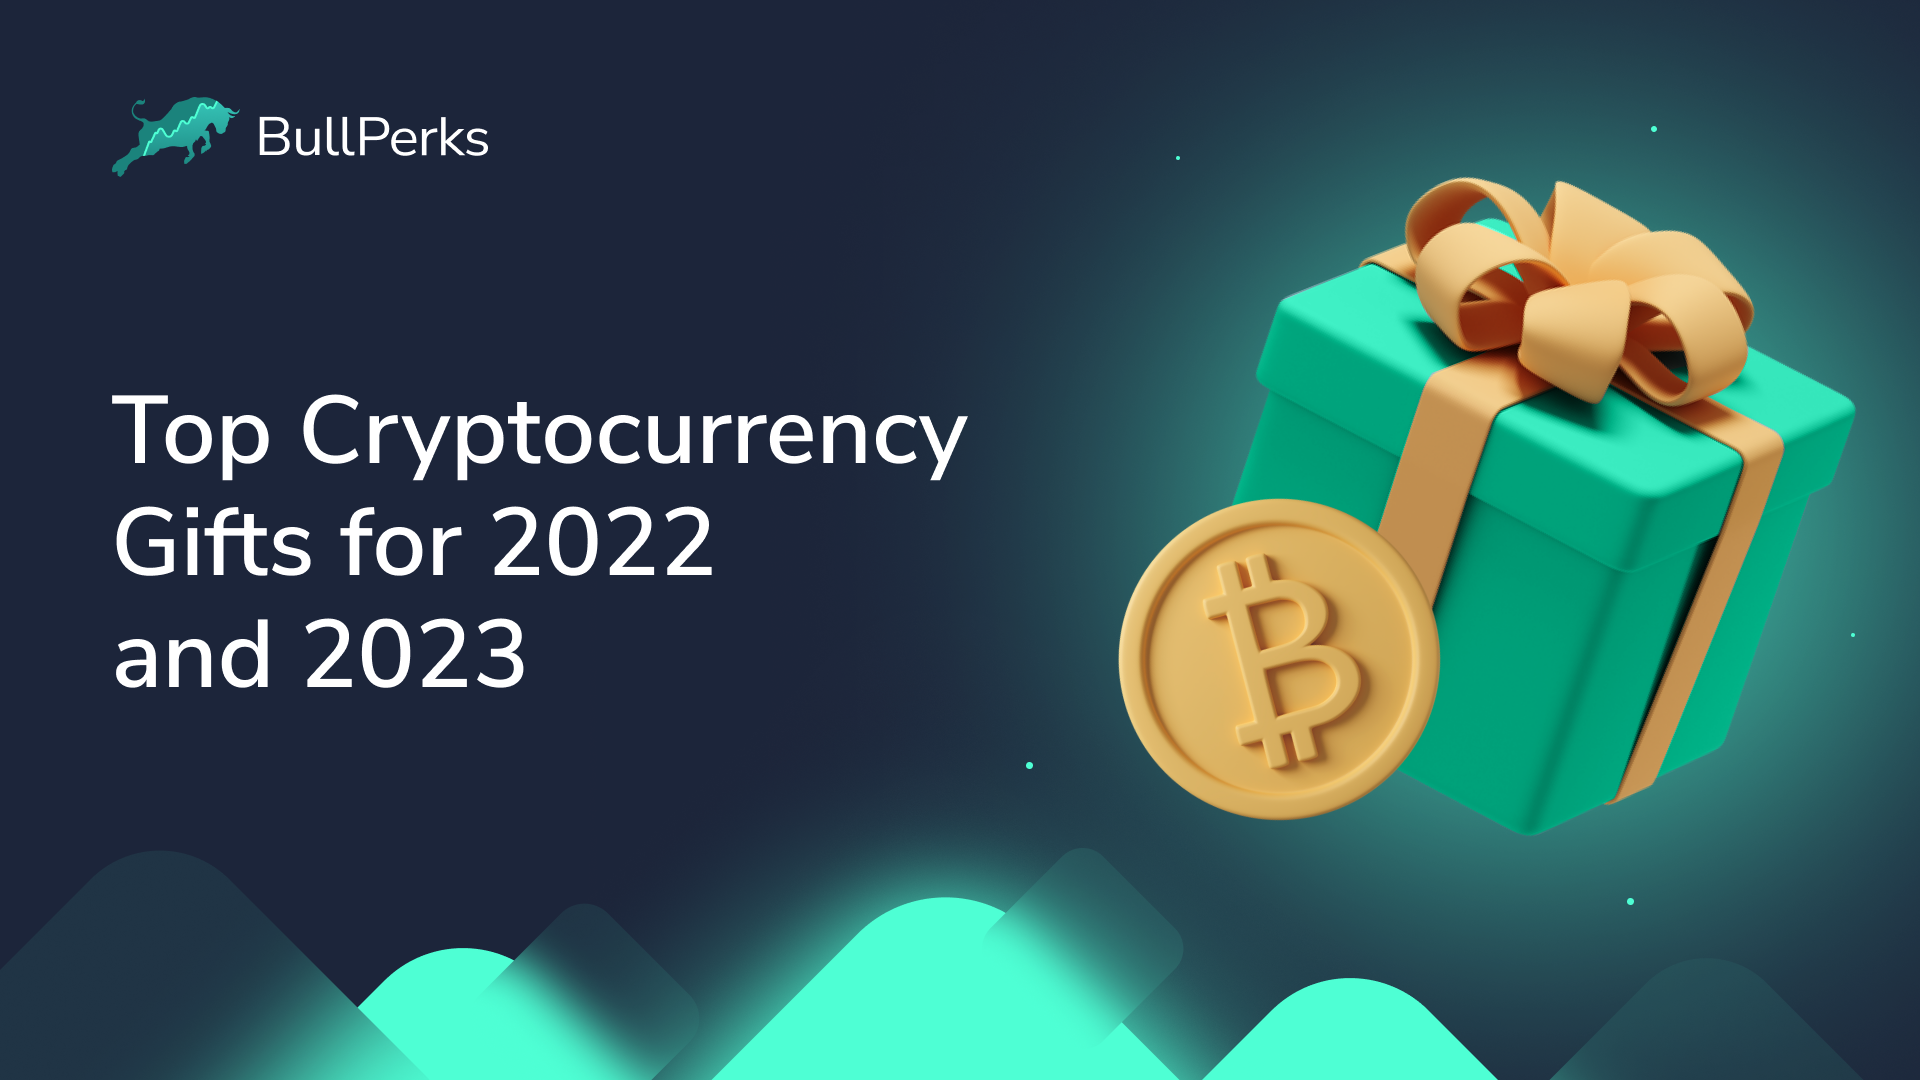 Top Cryptocurrency Gifts for 2022 and 2023 1 BullPerks